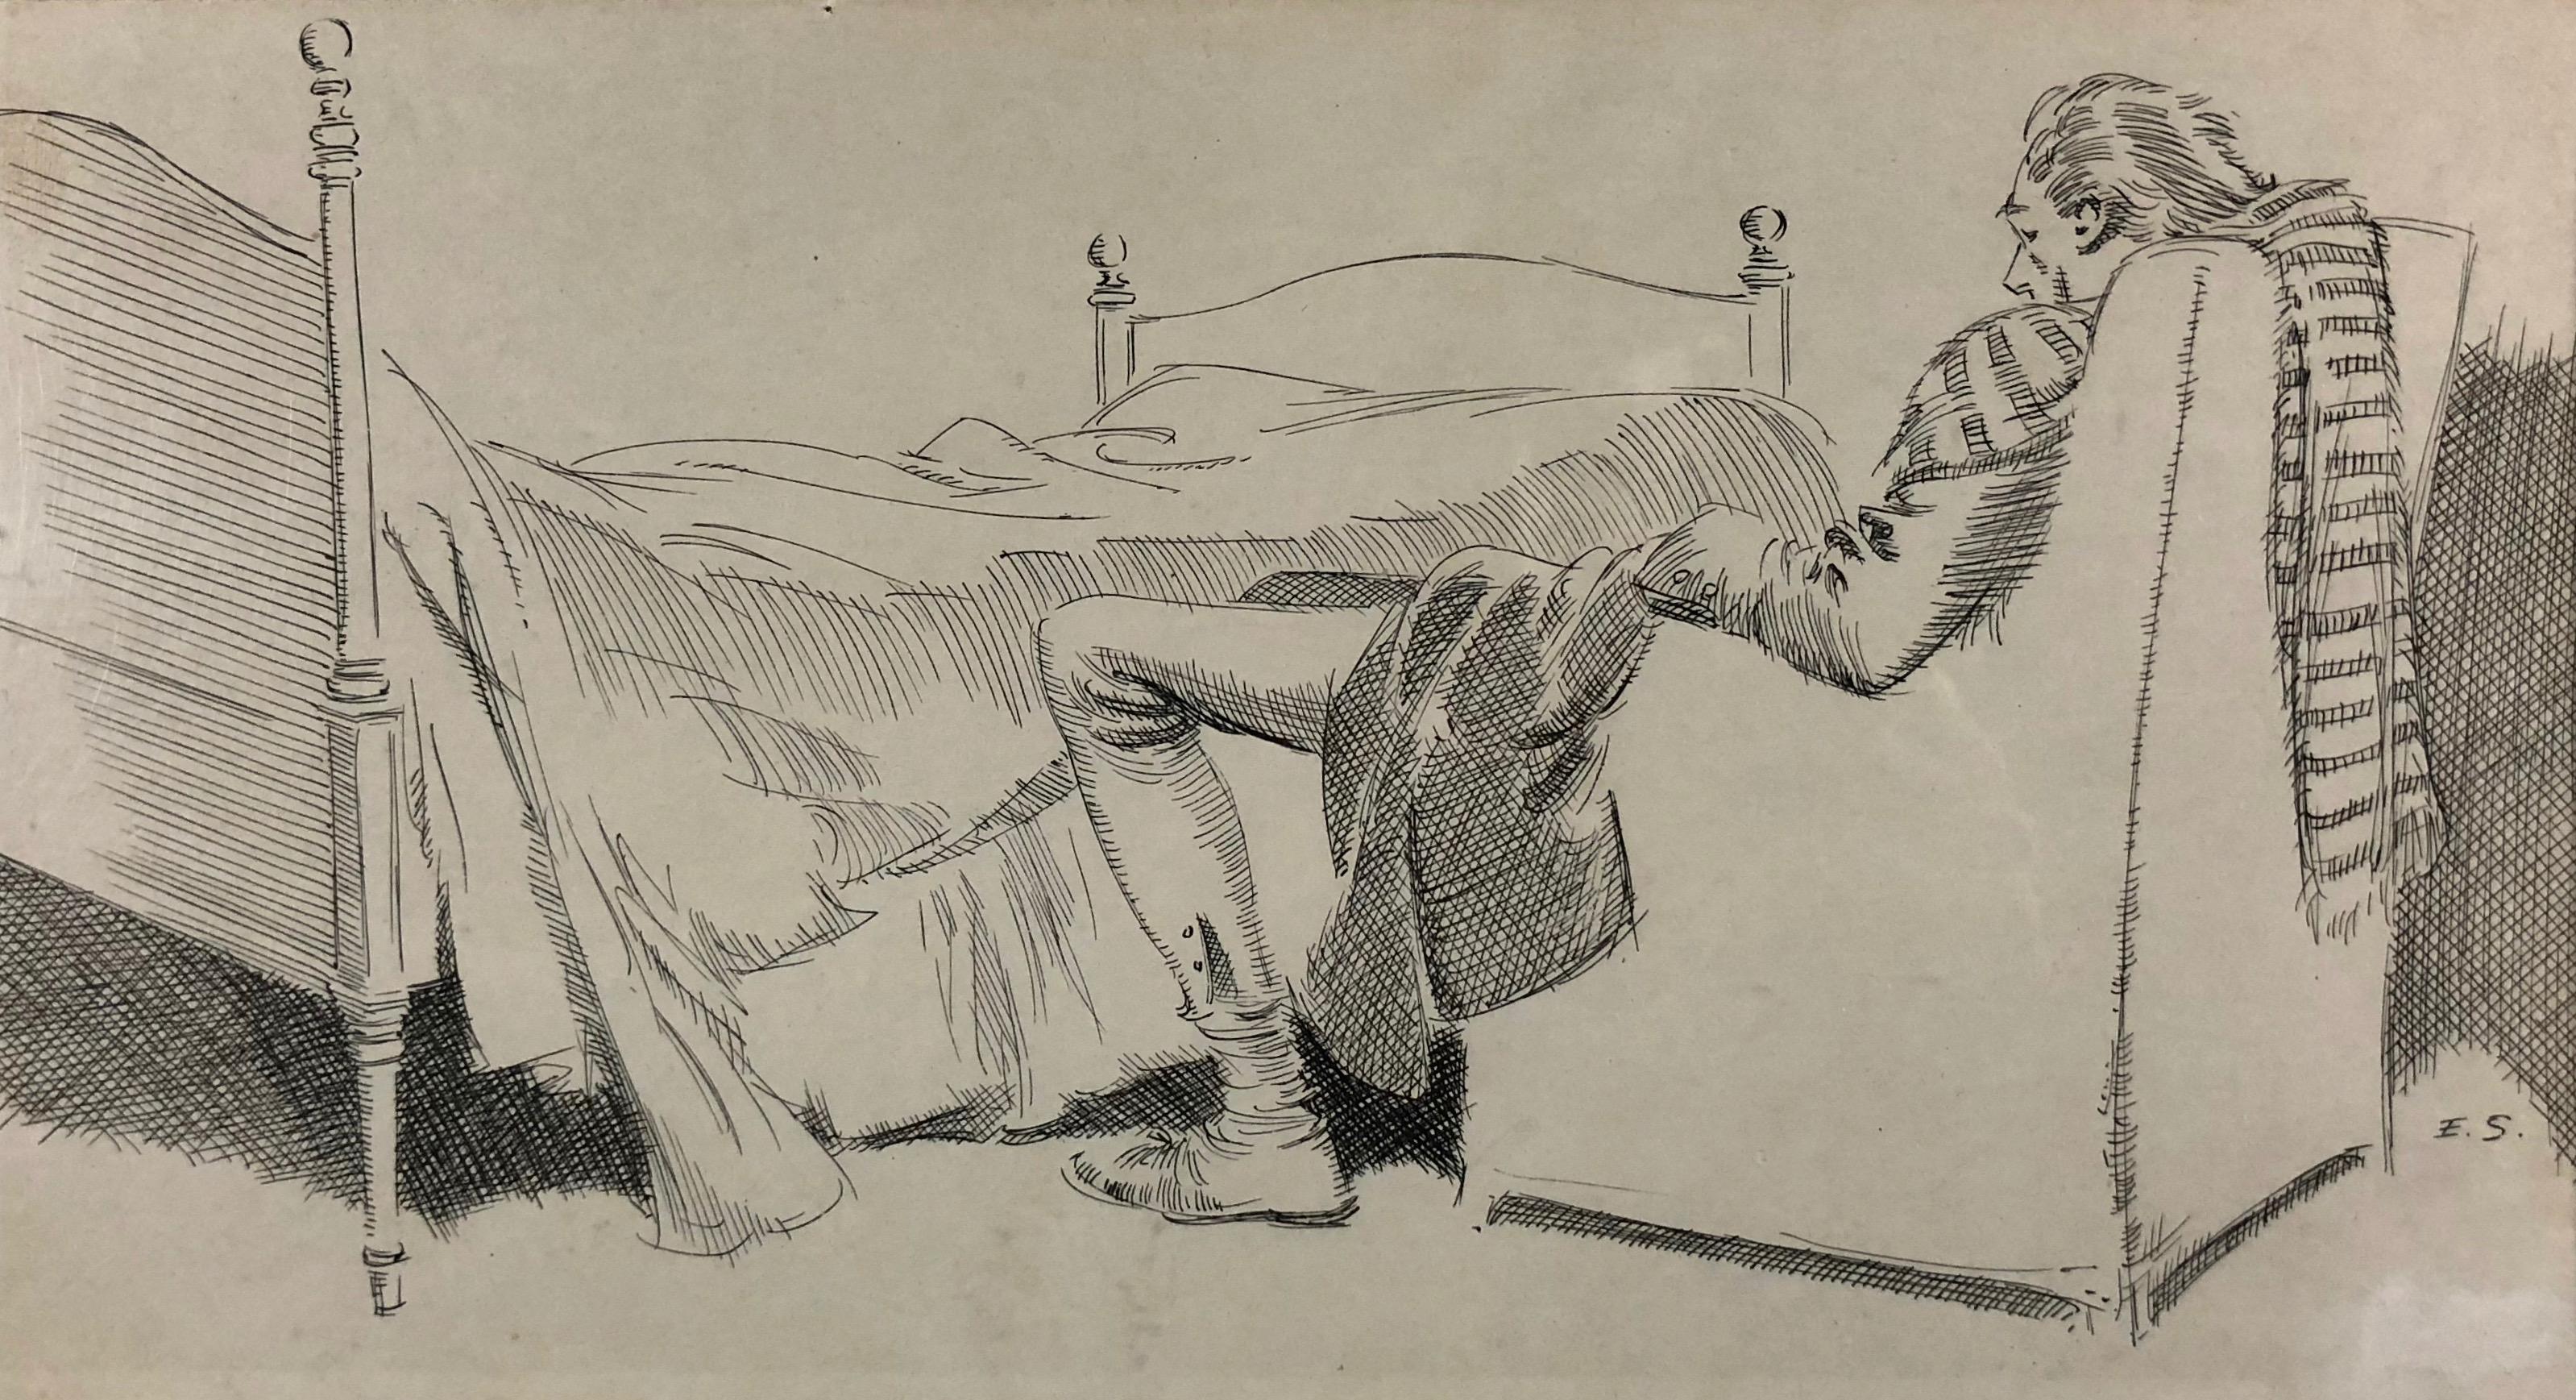 Gentleman Napping in a Chair (Possibly for Ichabod Crane or other Illustration) - Art by Everett Shinn